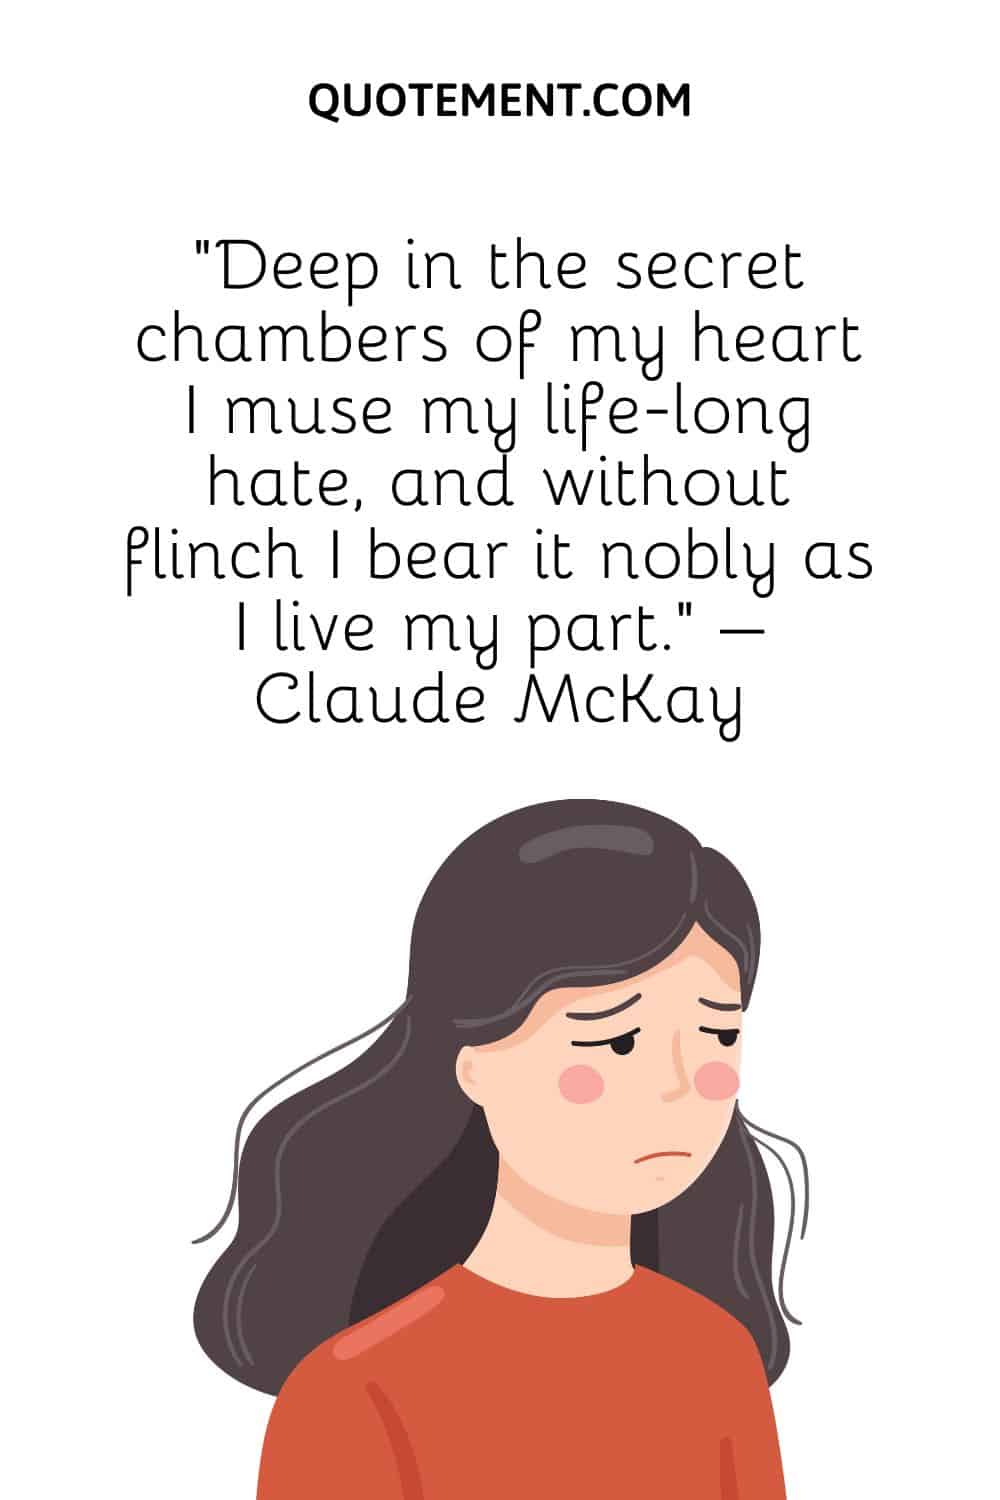 “Deep in the secret chambers of my heart I muse my life-long hate, and without flinch I bear it nobly as I live my part.” – Claude McKay